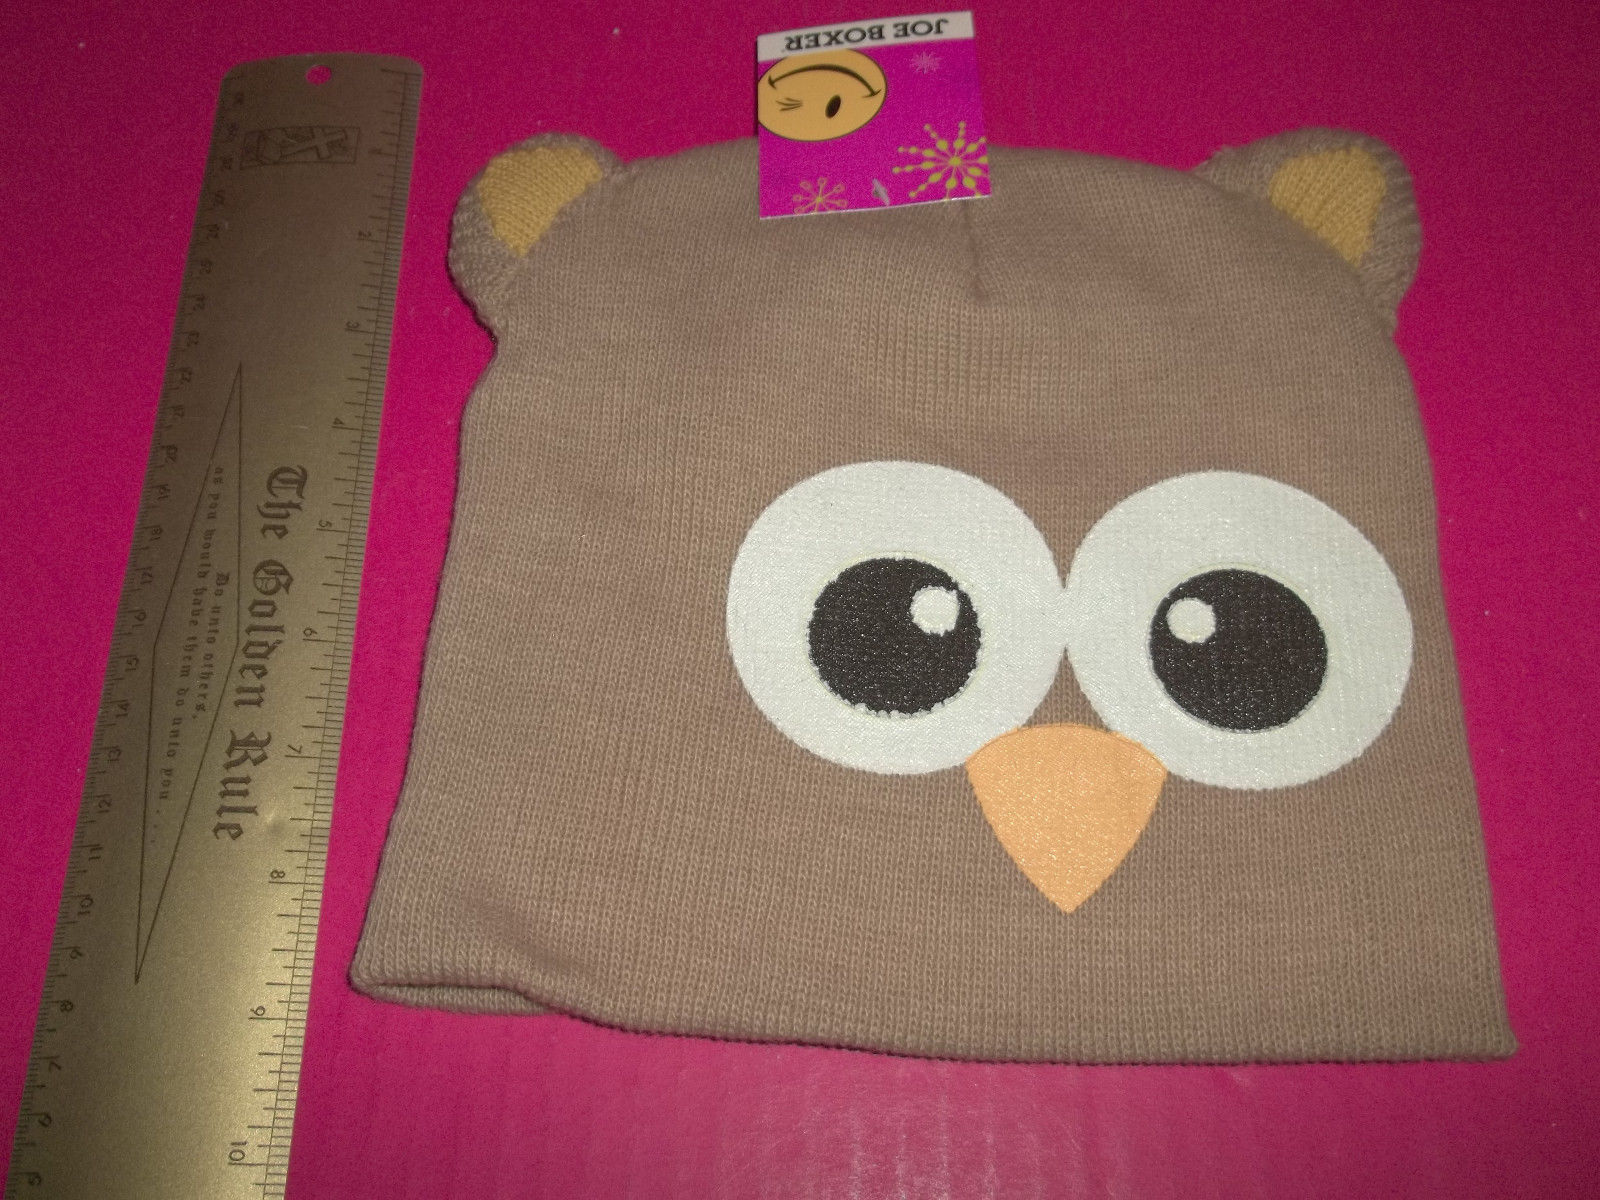 Joe Boxer Baby Clothes Hat Toddler Girl Accessory Cap Owl Cold Weather Gear New - $5.69